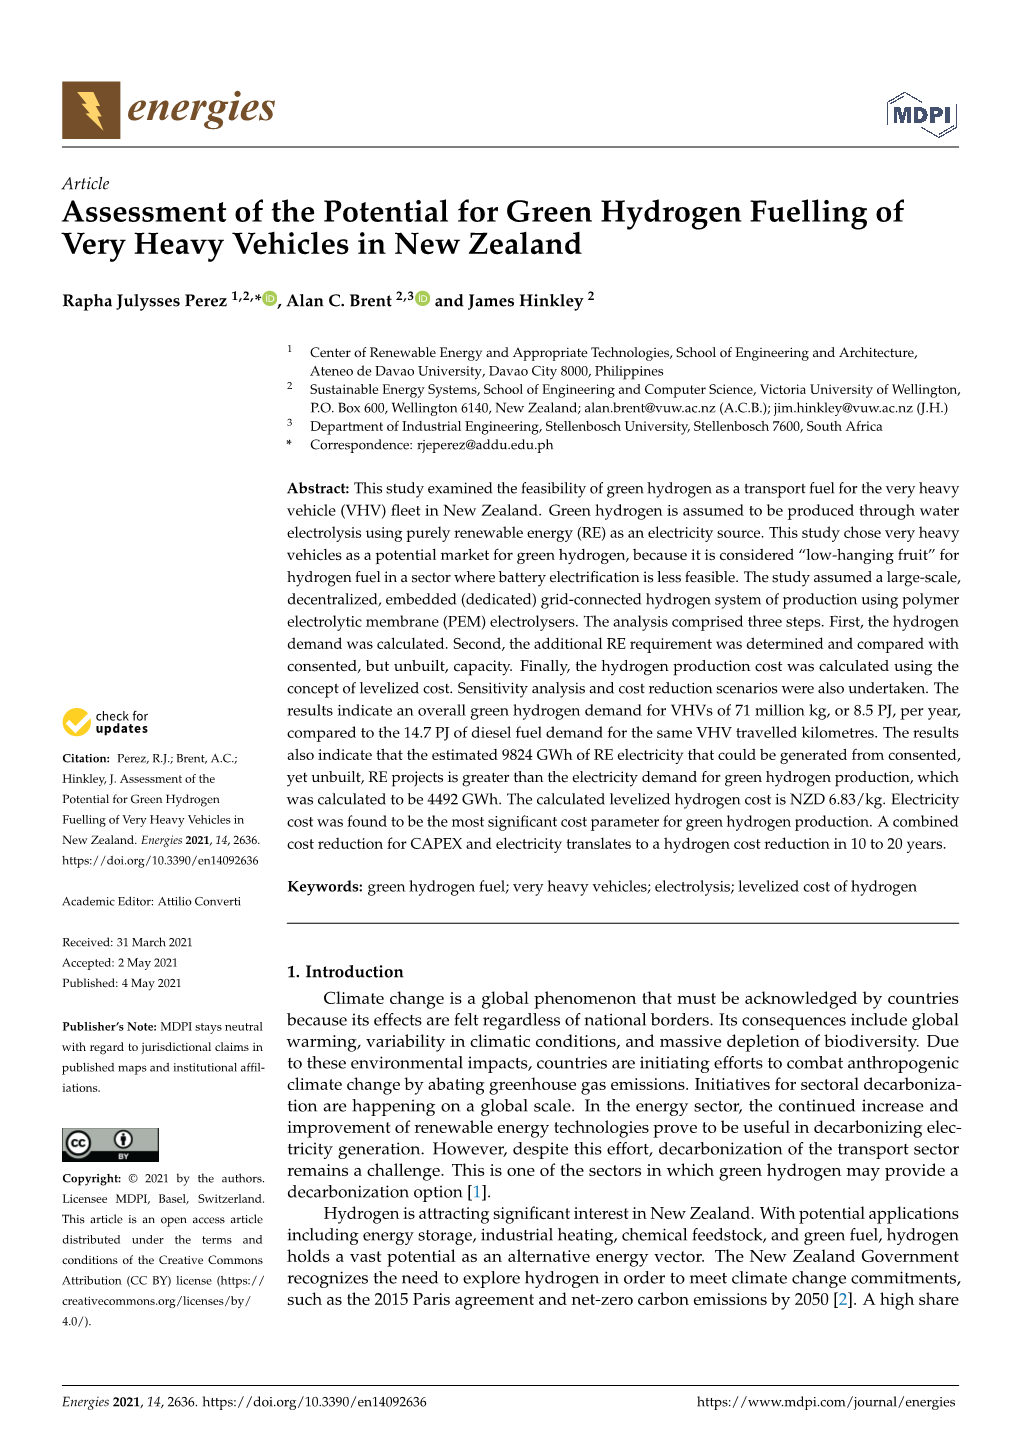 Assessment of the Potential for Green Hydrogen Fuelling of Very Heavy Vehicles in New Zealand